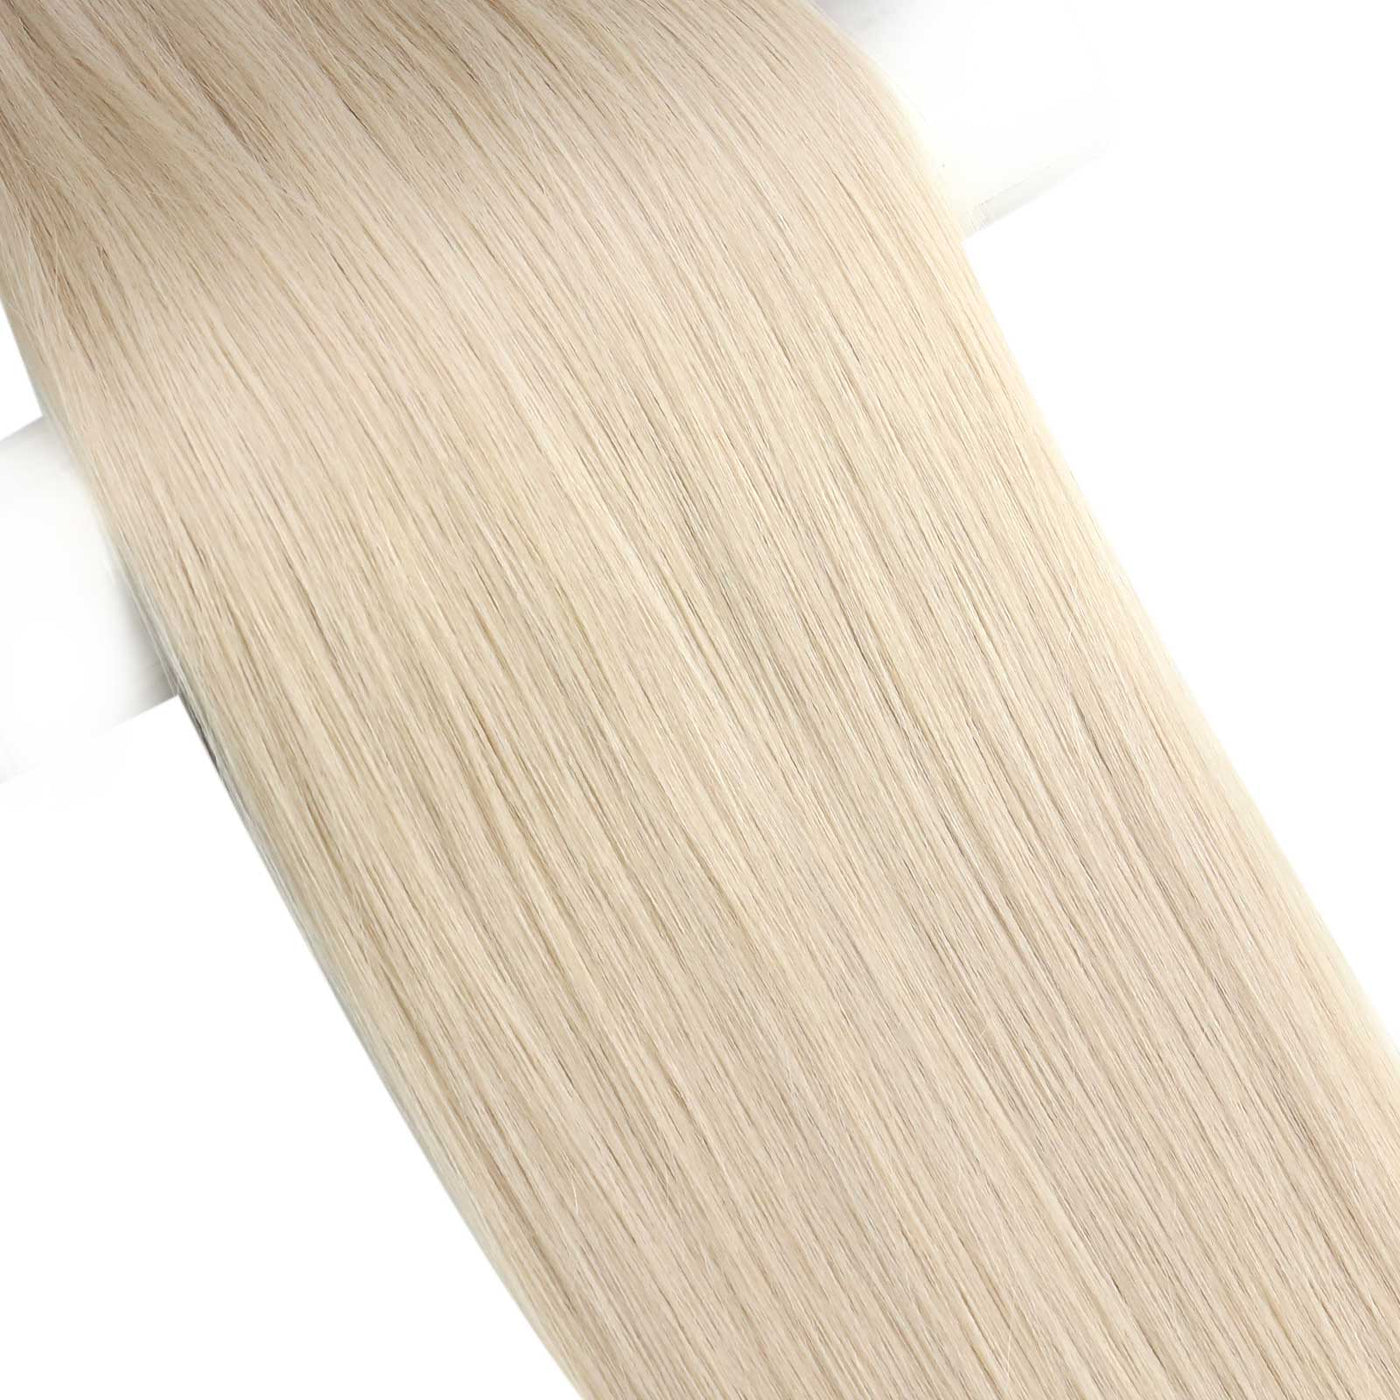 Virgin Weft Hair Extension Invisible Injected Flat Weft With Hole White Blonde#1000